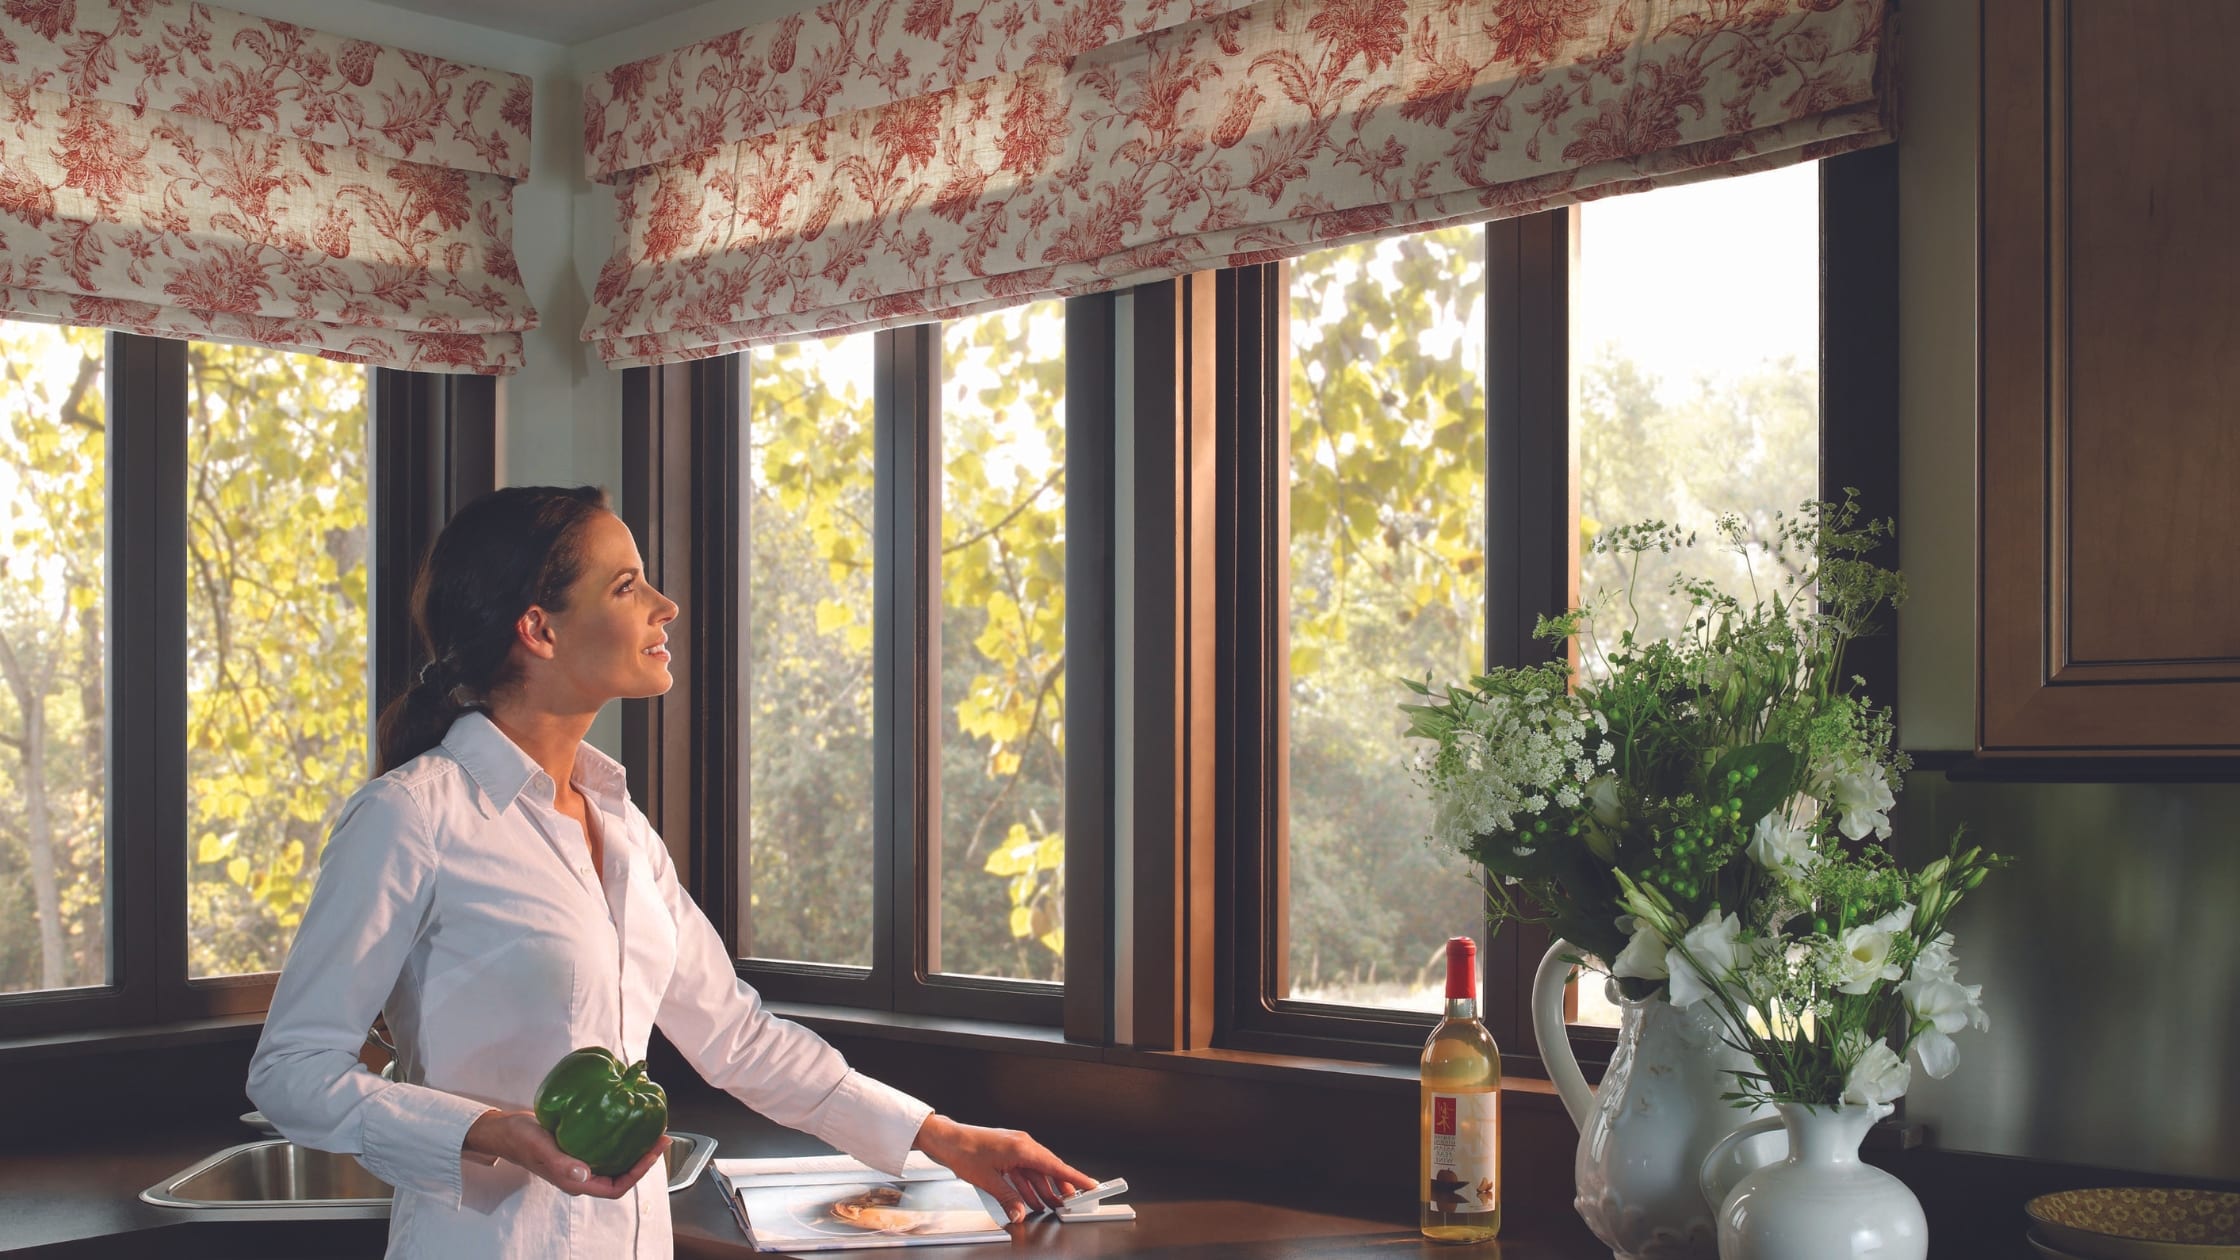 Latest Innovations In Smart Shades And Blinds - Smart Home World Magazine